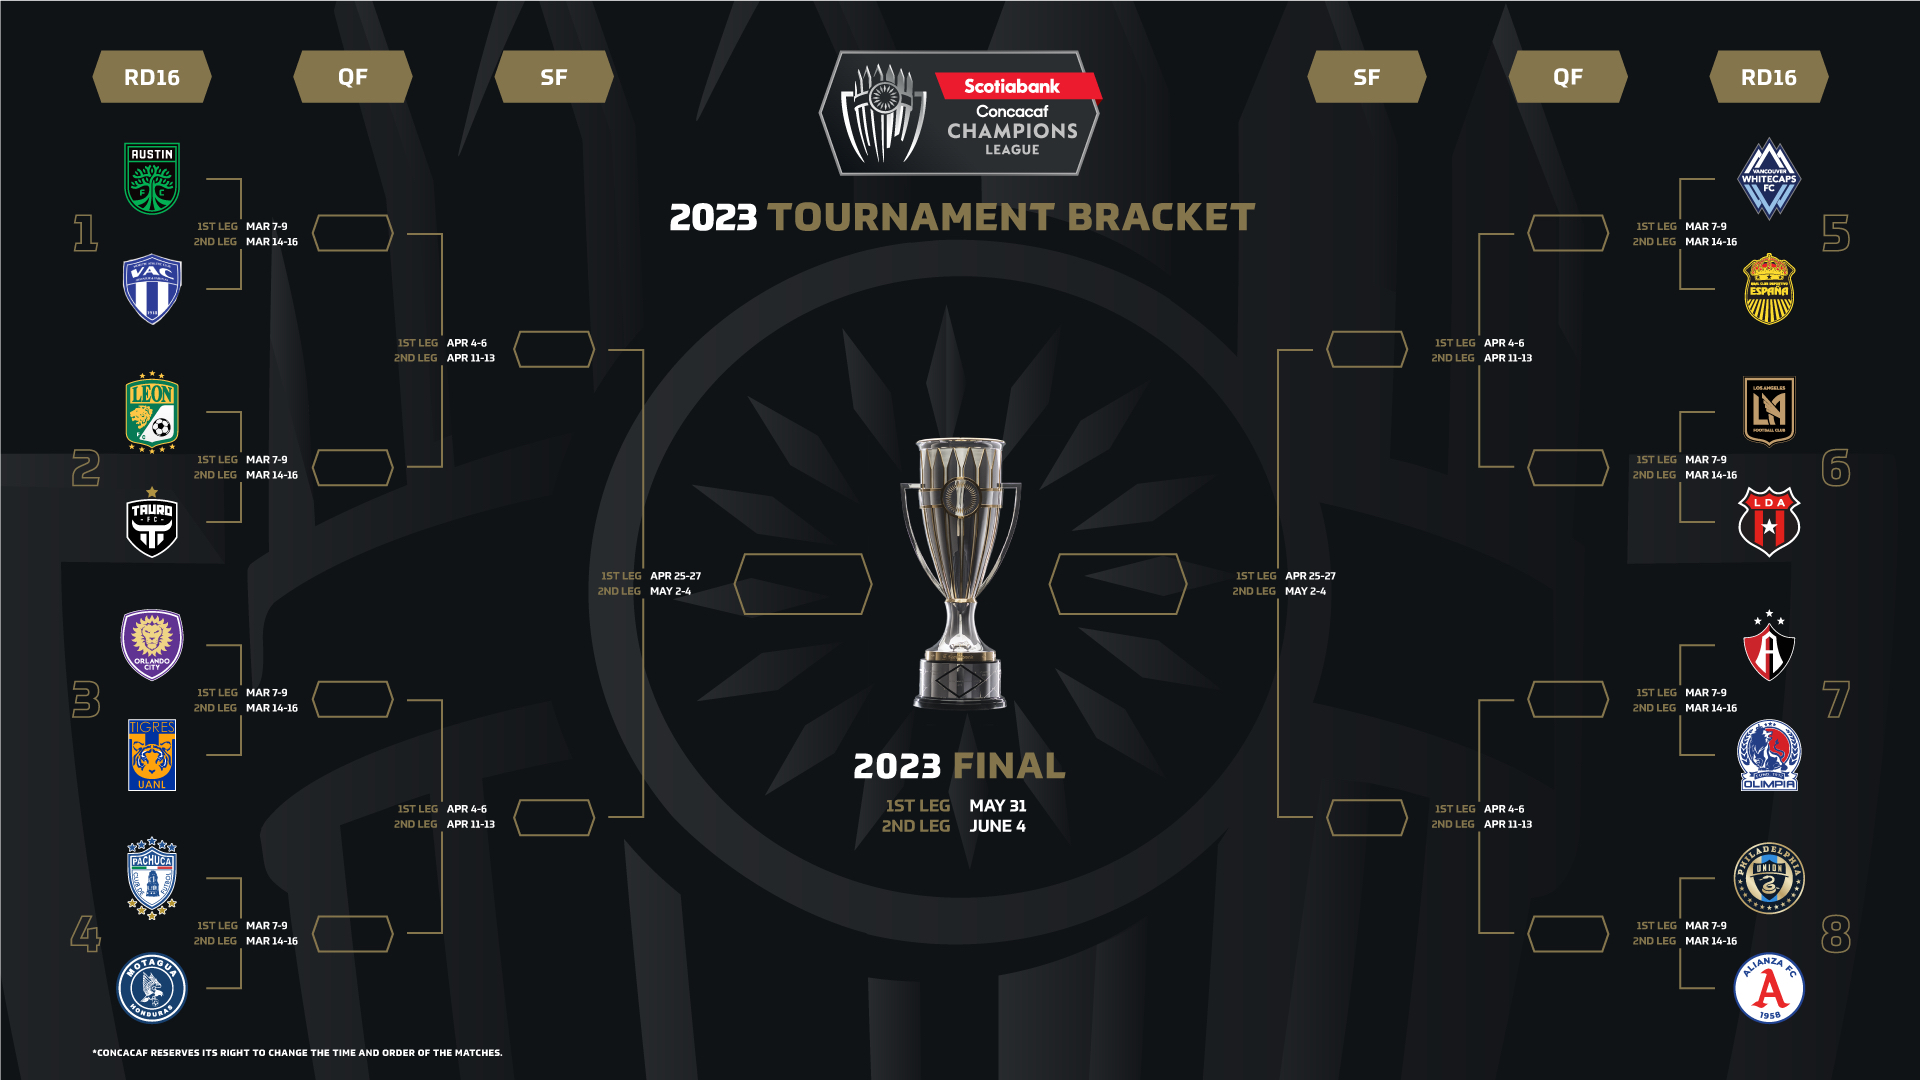 Concacaf Champions League Round of 16 full schedule released